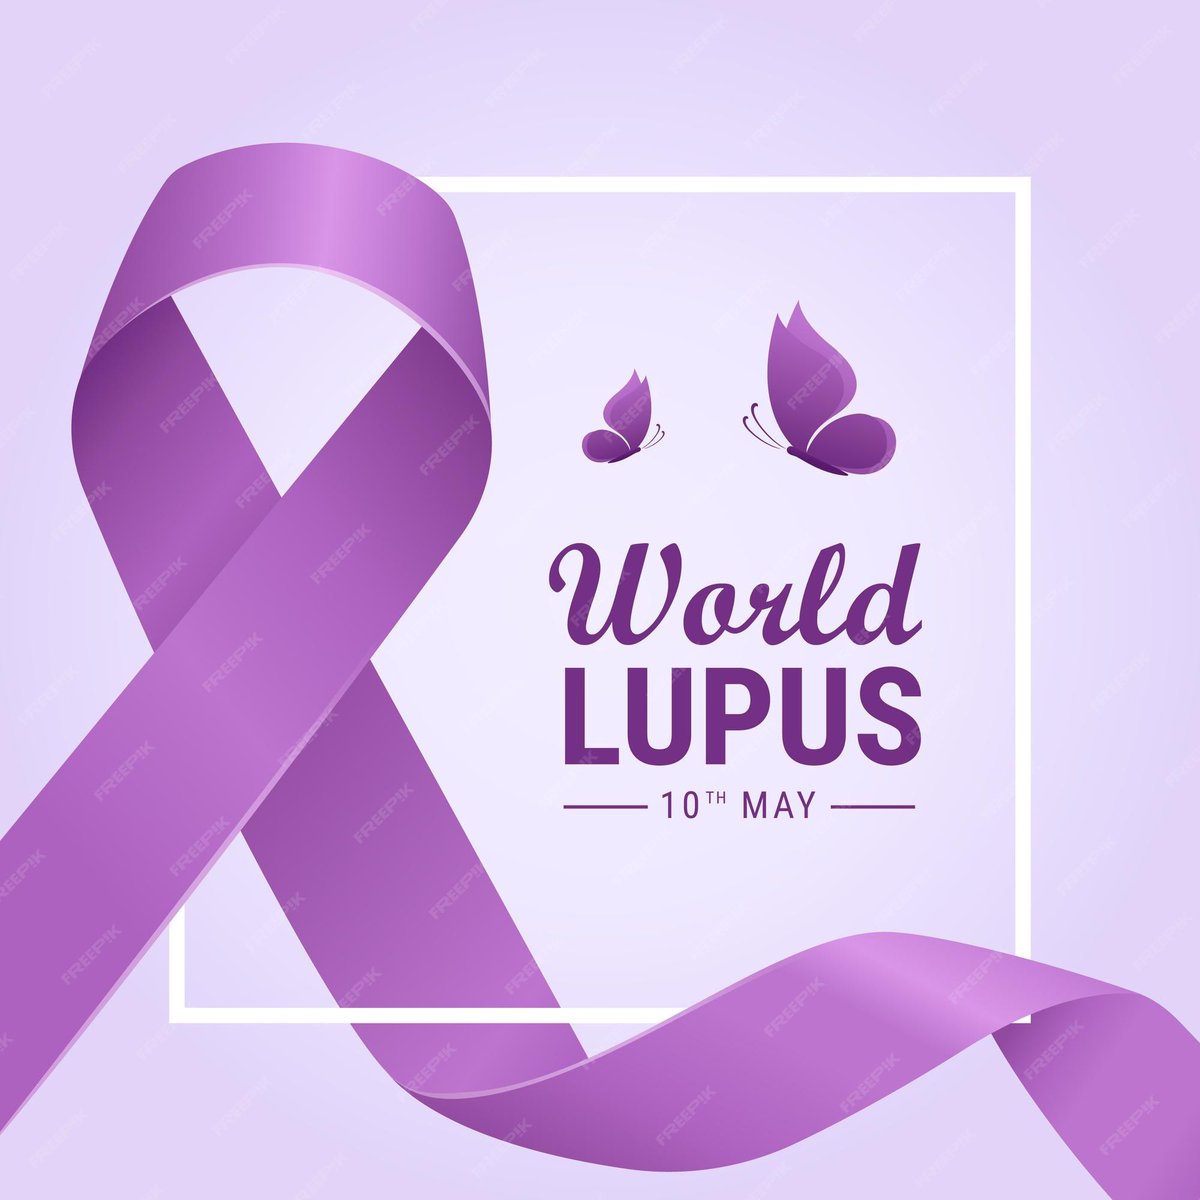 World Lupus Day is here! No rainy morning could dampen our enthusiasm to #putonpurple as we continue to raise #lupus awareness & educate every day especially during #LupusAwarenessMonth .. #36yrjourney #lifechanger 💁🏻‍♀️